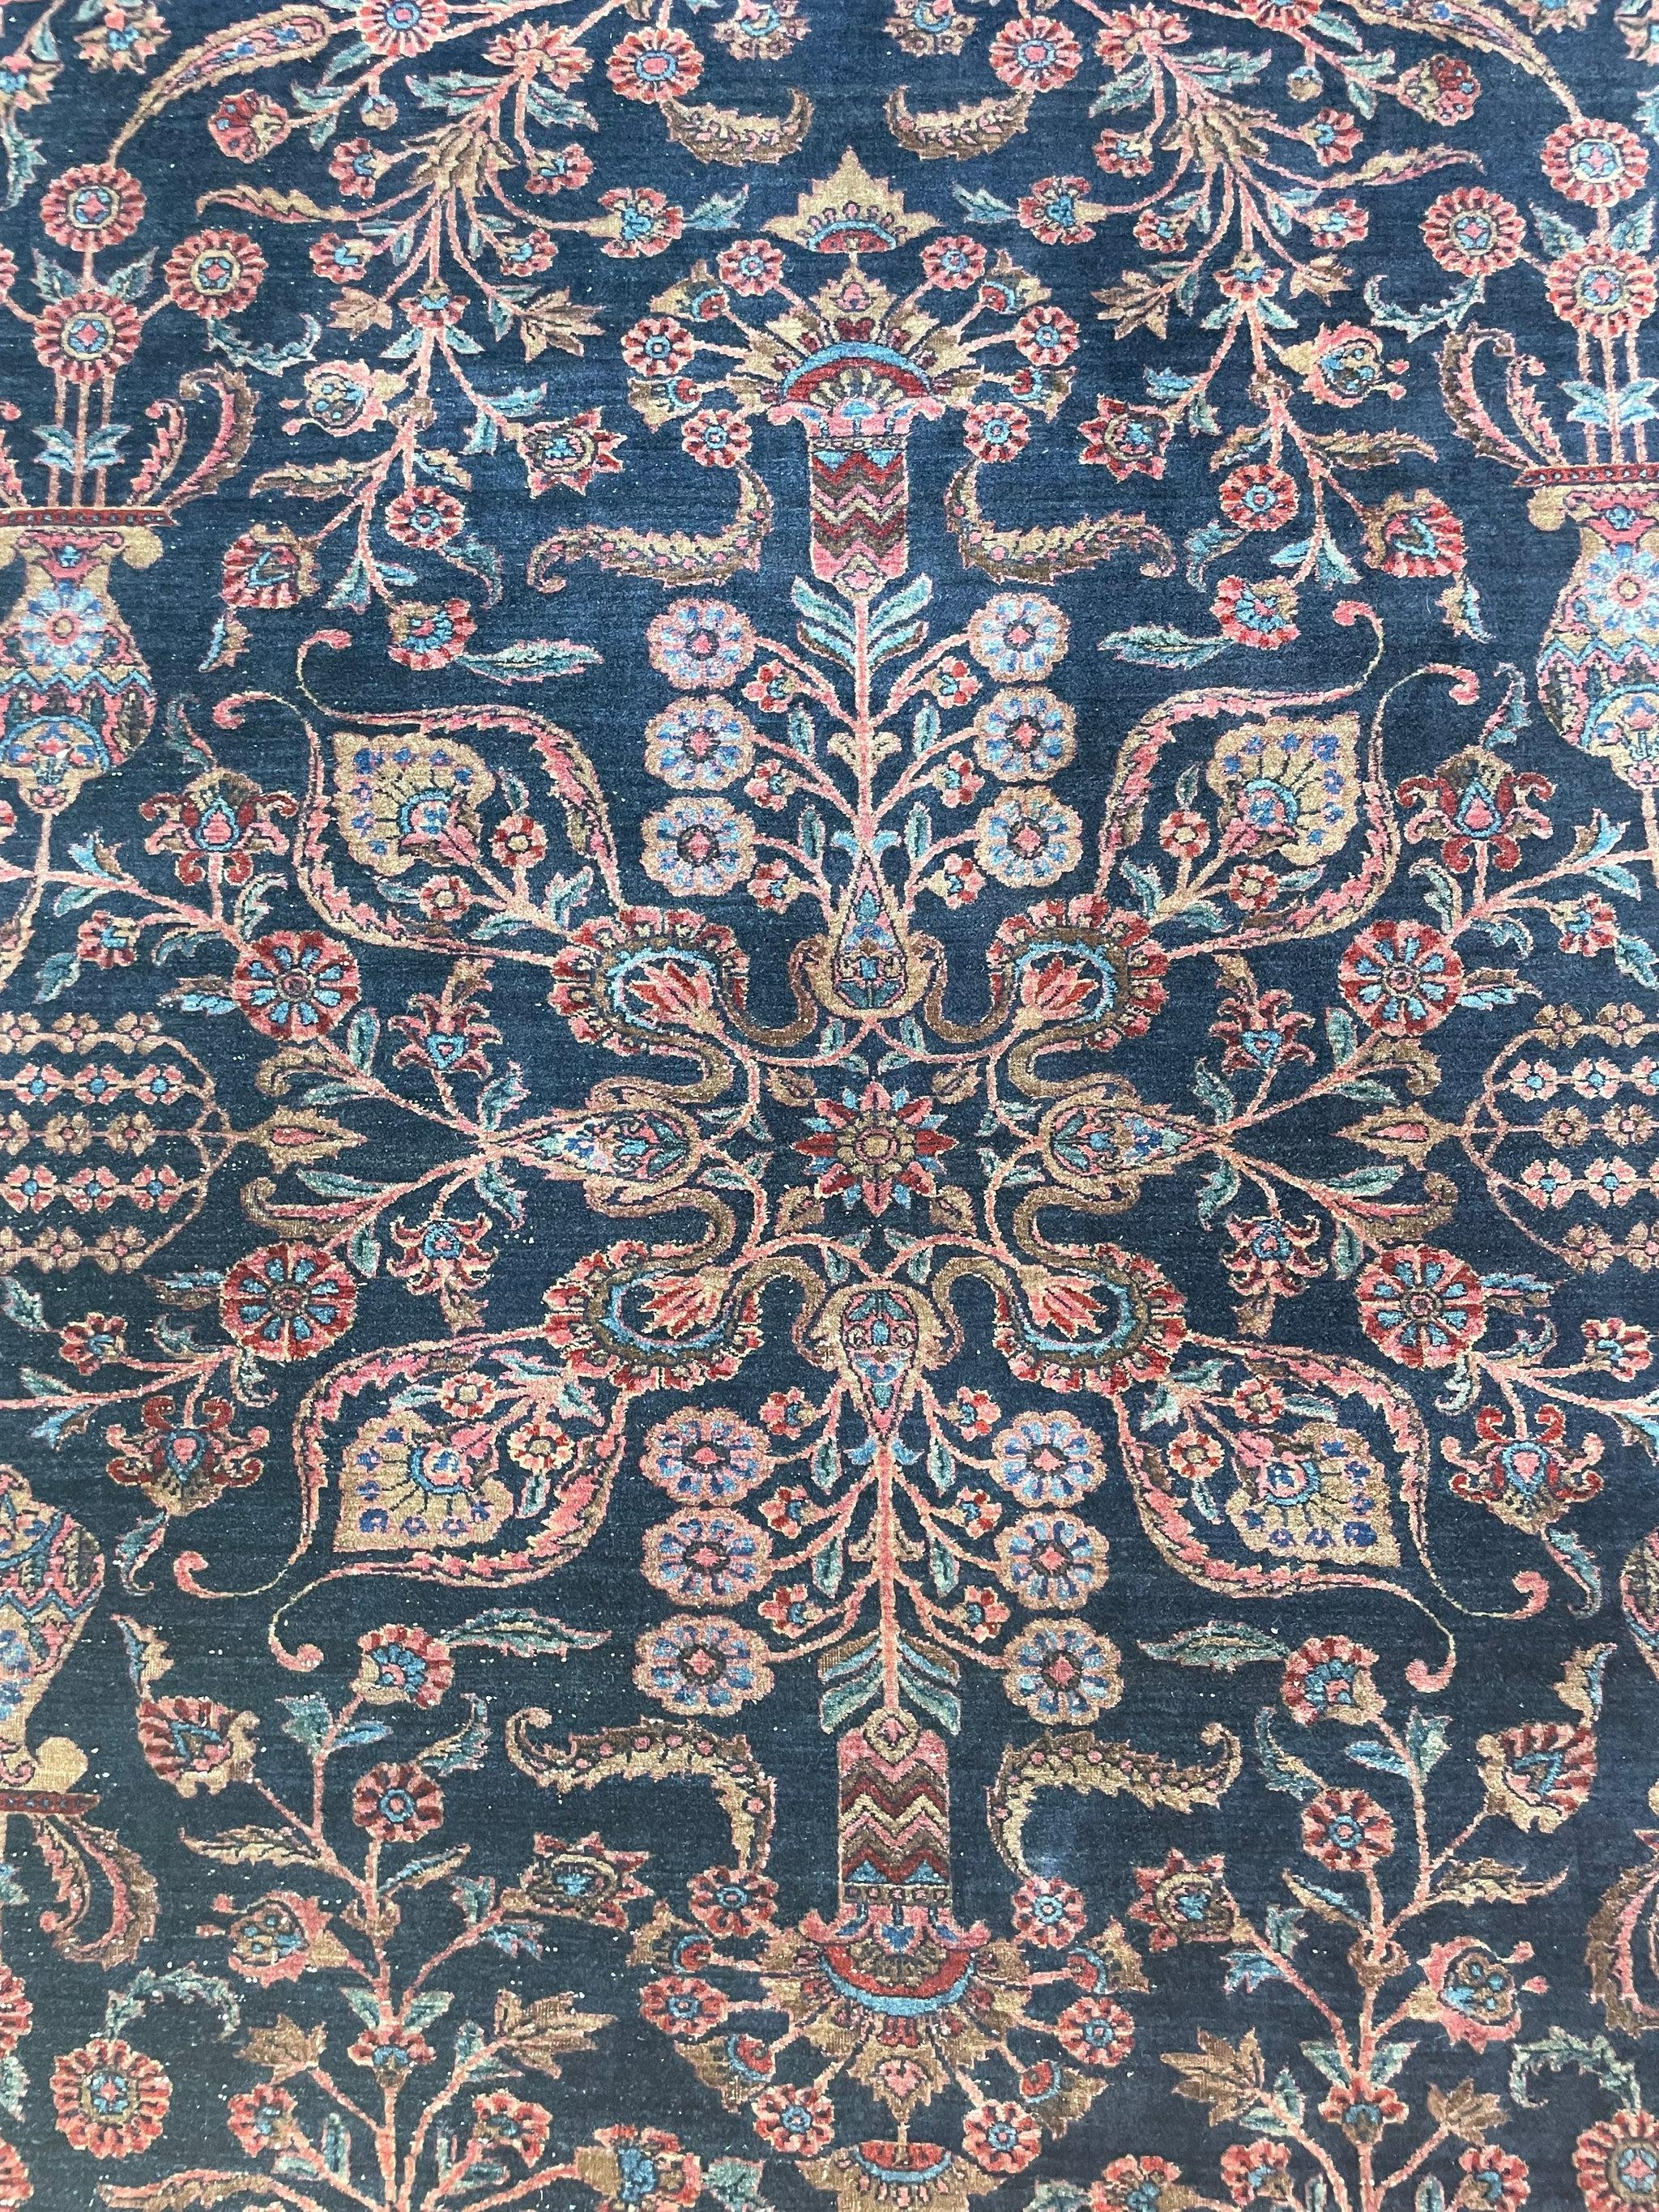 Mammoth Ballroom Size Ralph Lauren Vibe Sarouk Yazd Antique Rug, circa 1920-30's In Good Condition For Sale In Milwaukee, WI